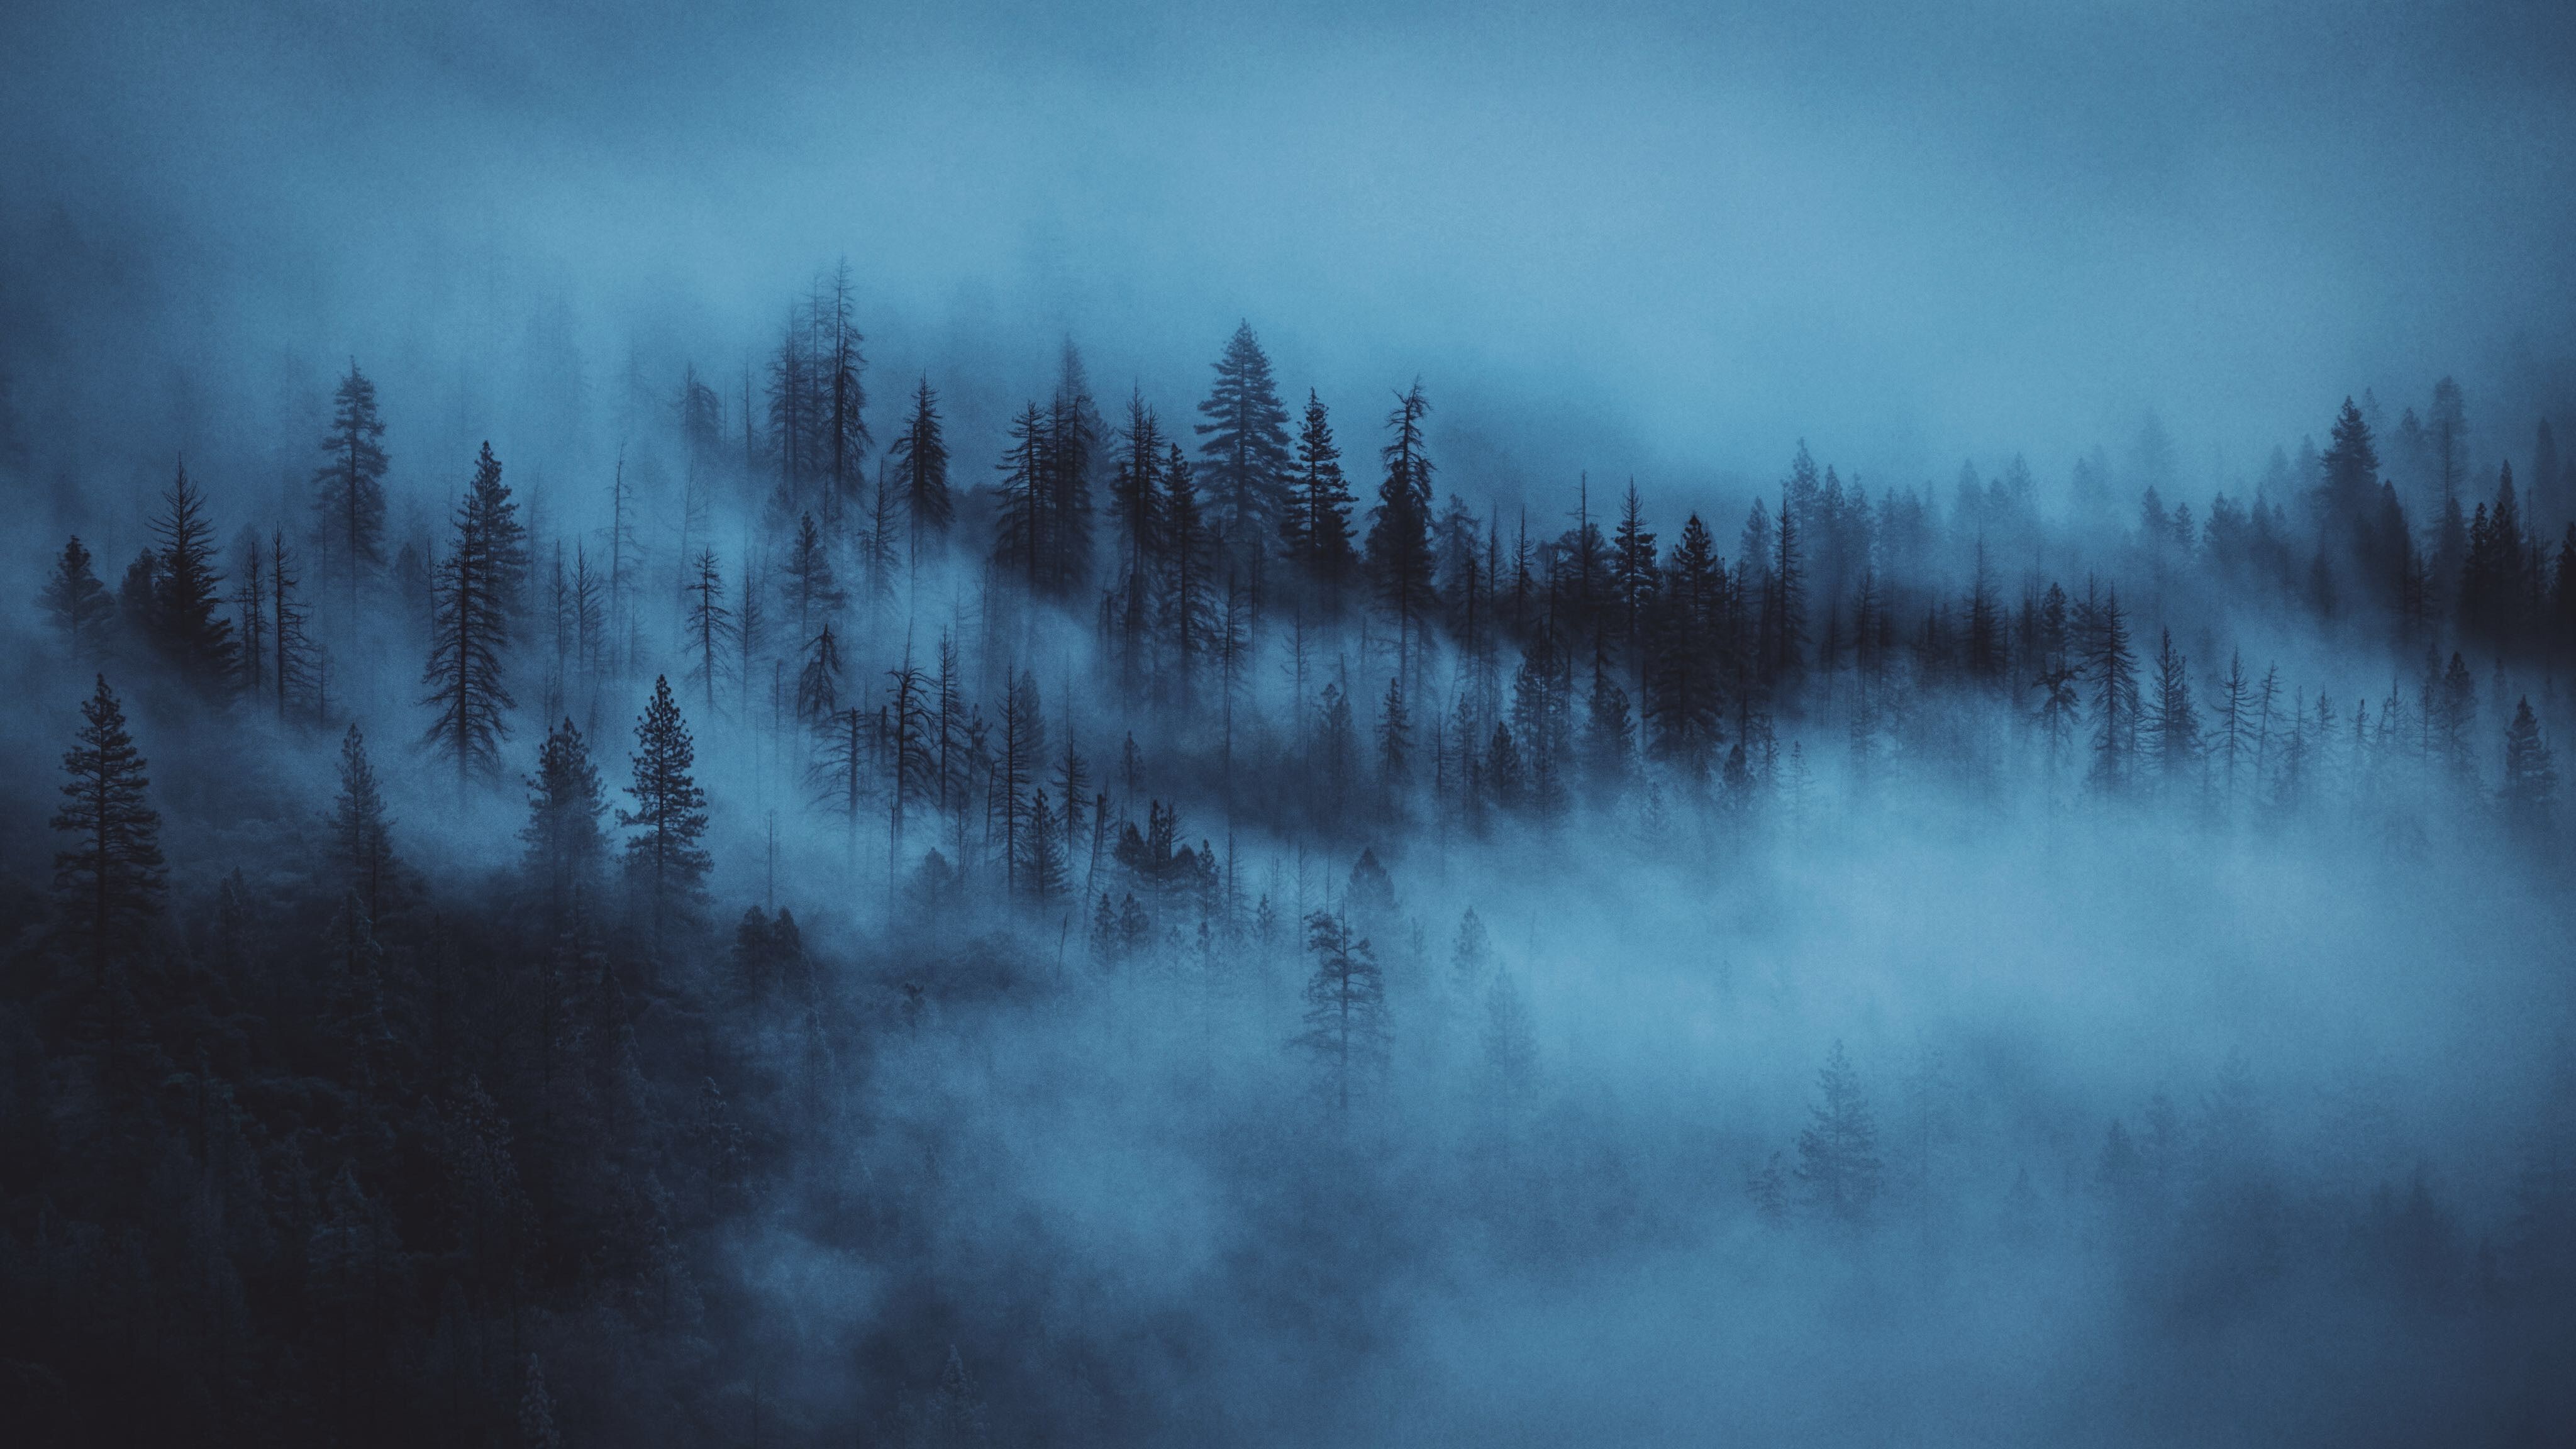 Mobile wallpaper: Fog, Nature, Forest, Dawn, Trees, 60870 download the picture for free